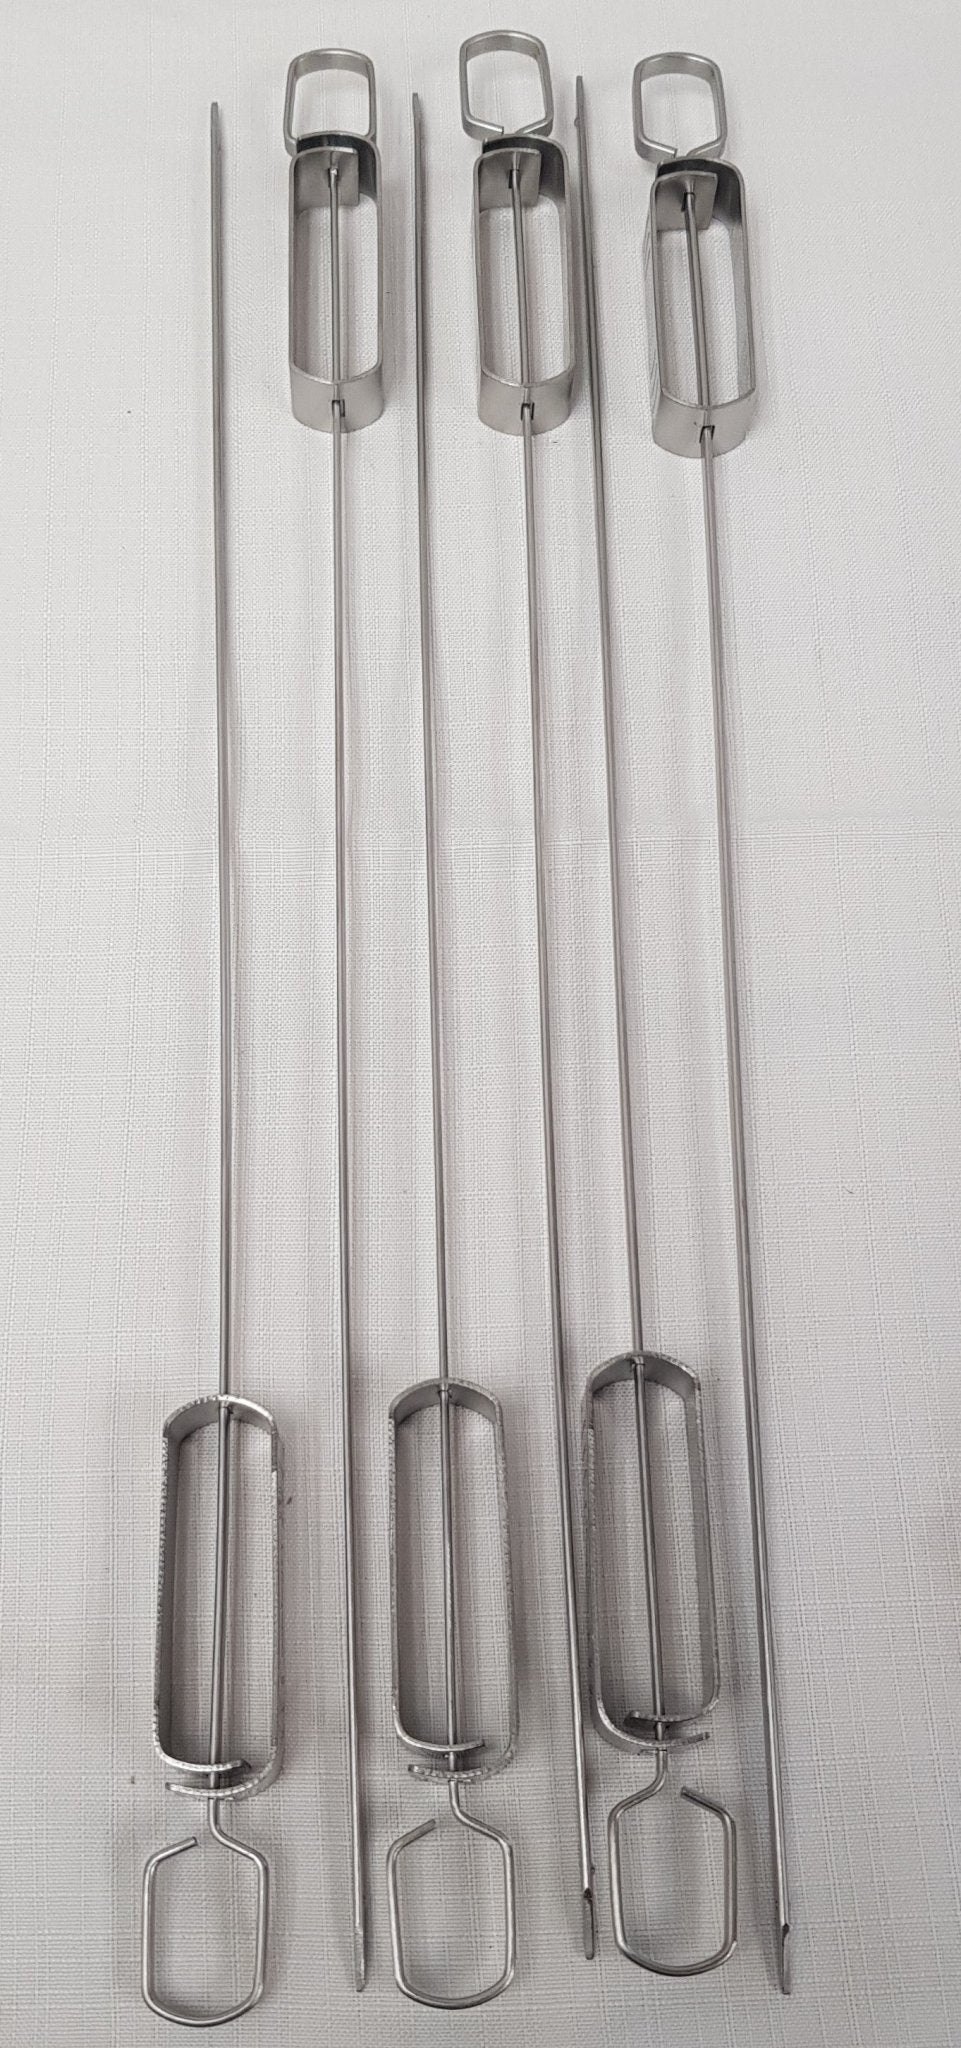 Lifespace Quality Set of 6 Stainless Steel Flat Kebab Skewers with Push Bar - Lifespace